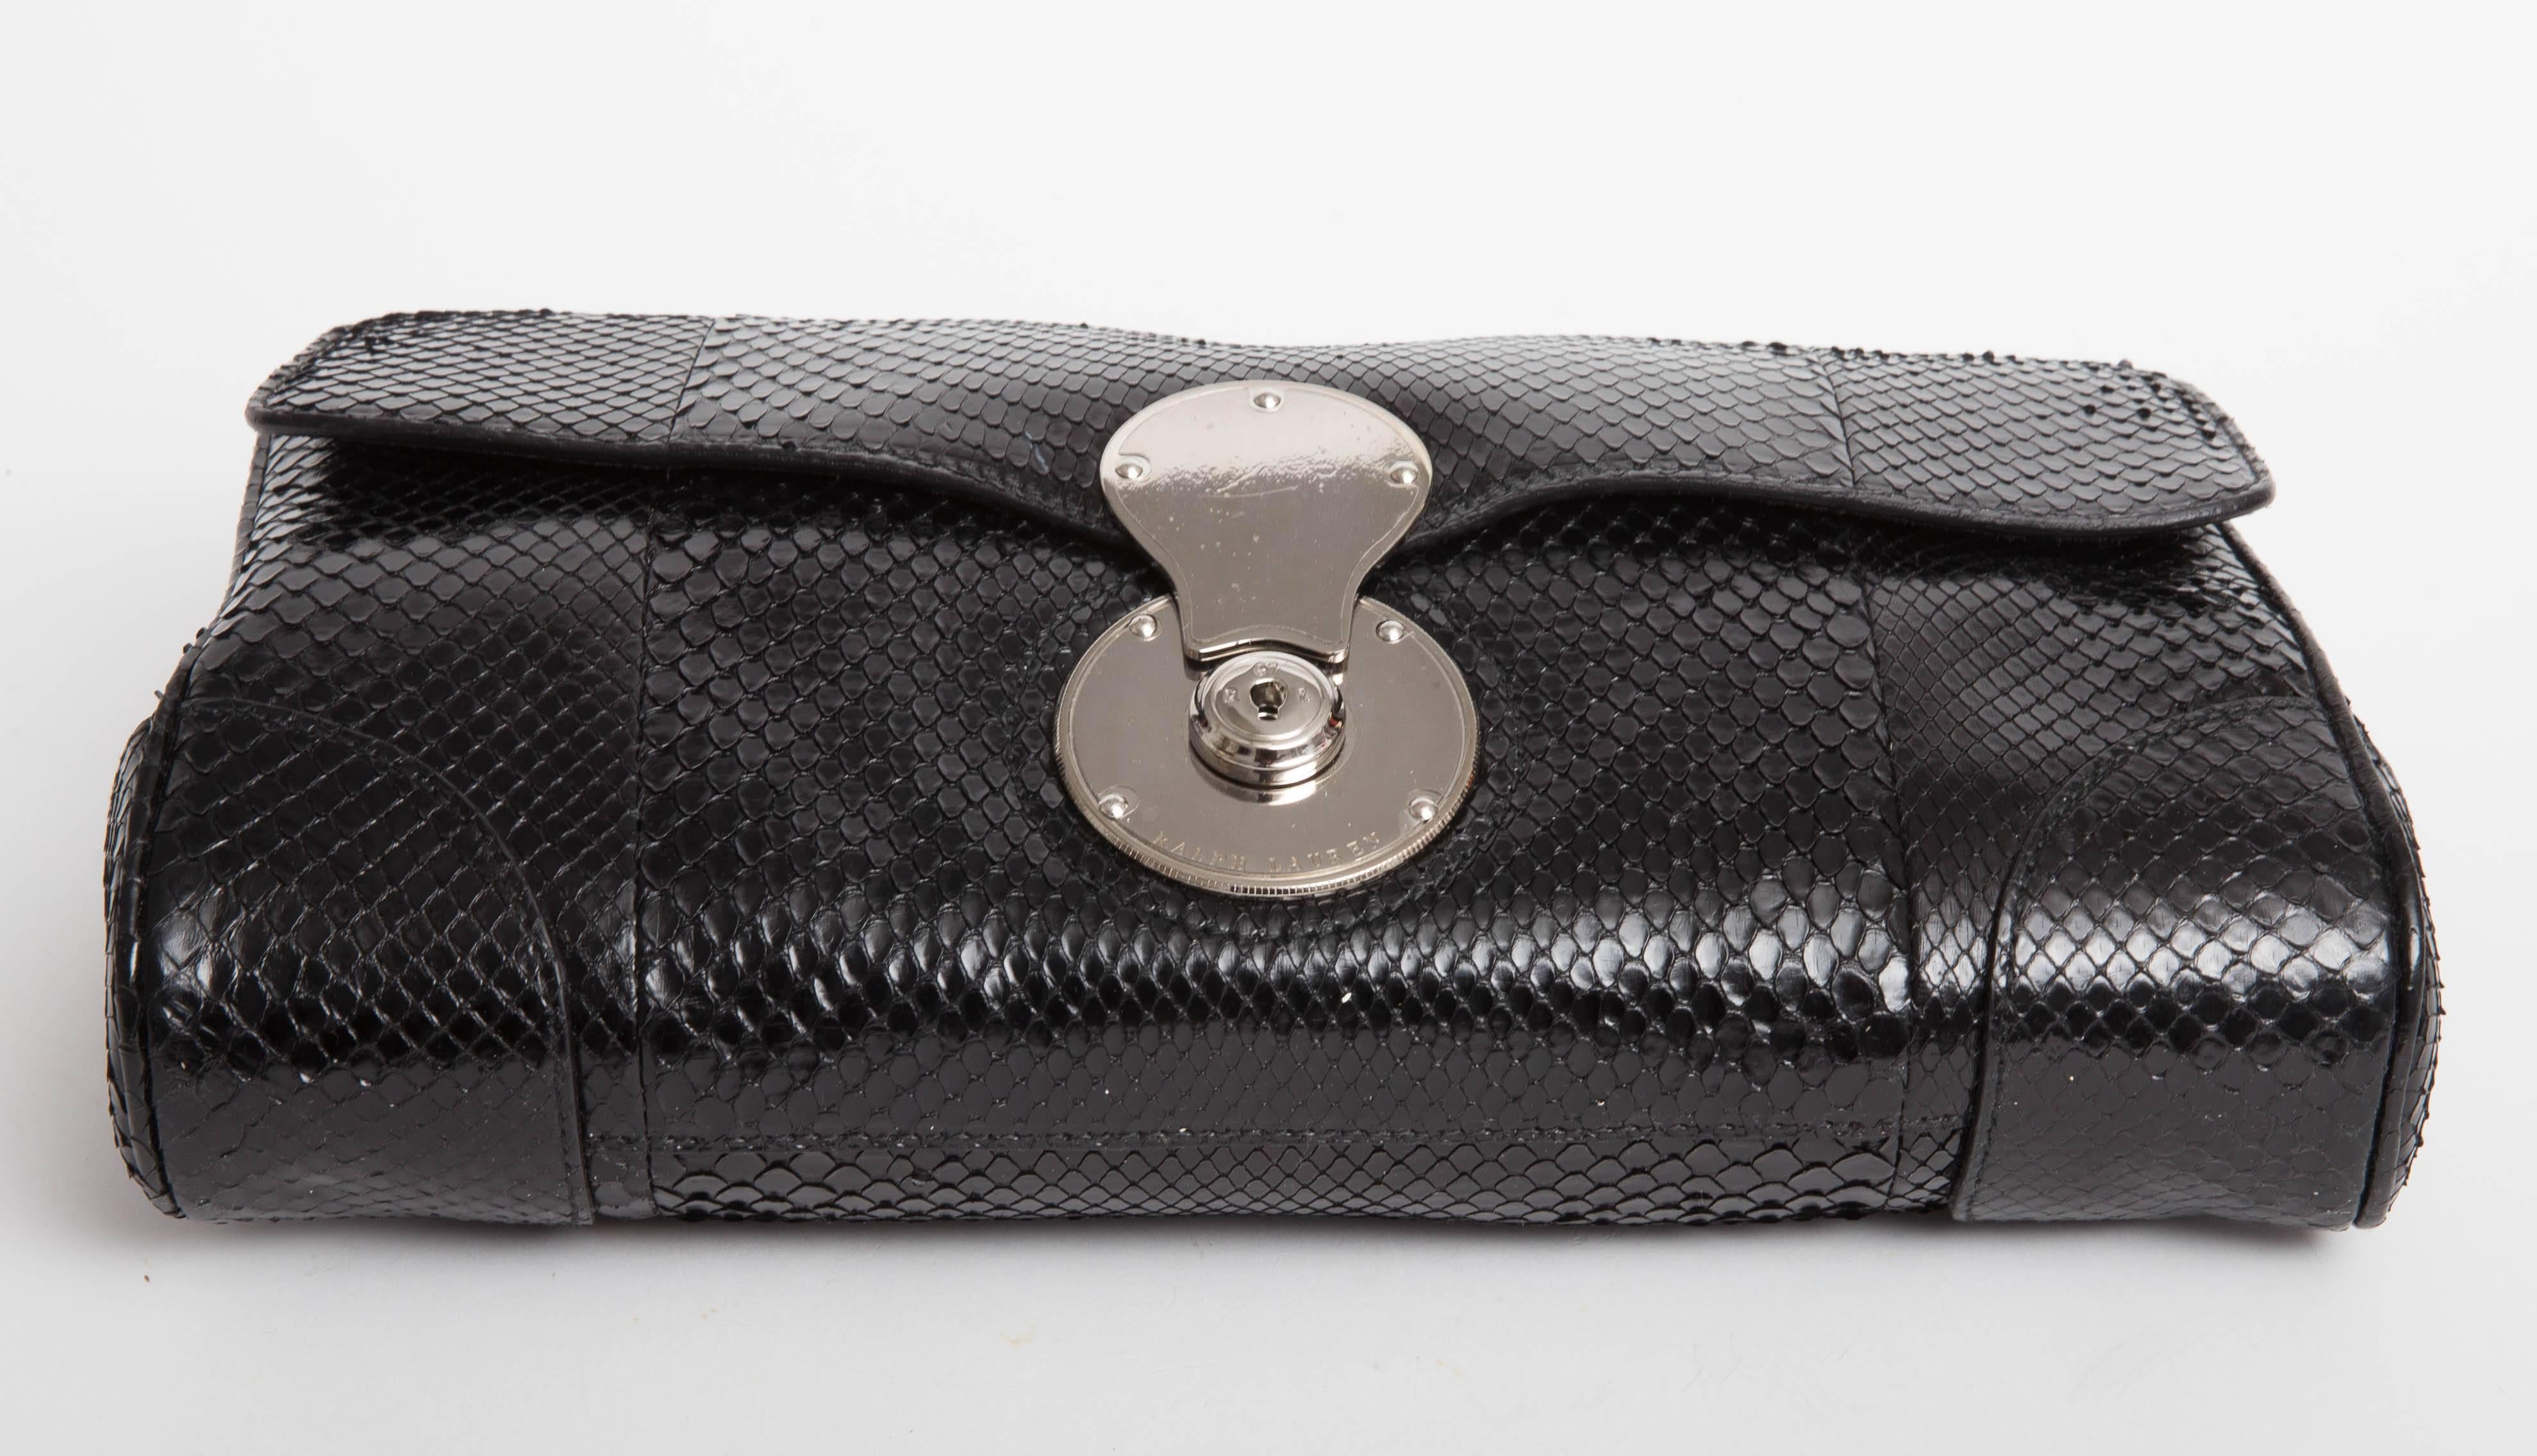 Ralph Lauren Oversize  Monaco Black Python Convertible Clutch features a removable strap that converts to shoulder bag, silver hardware and two interior pockets.

Comes with two original dusters, authenticity card, and original tag.